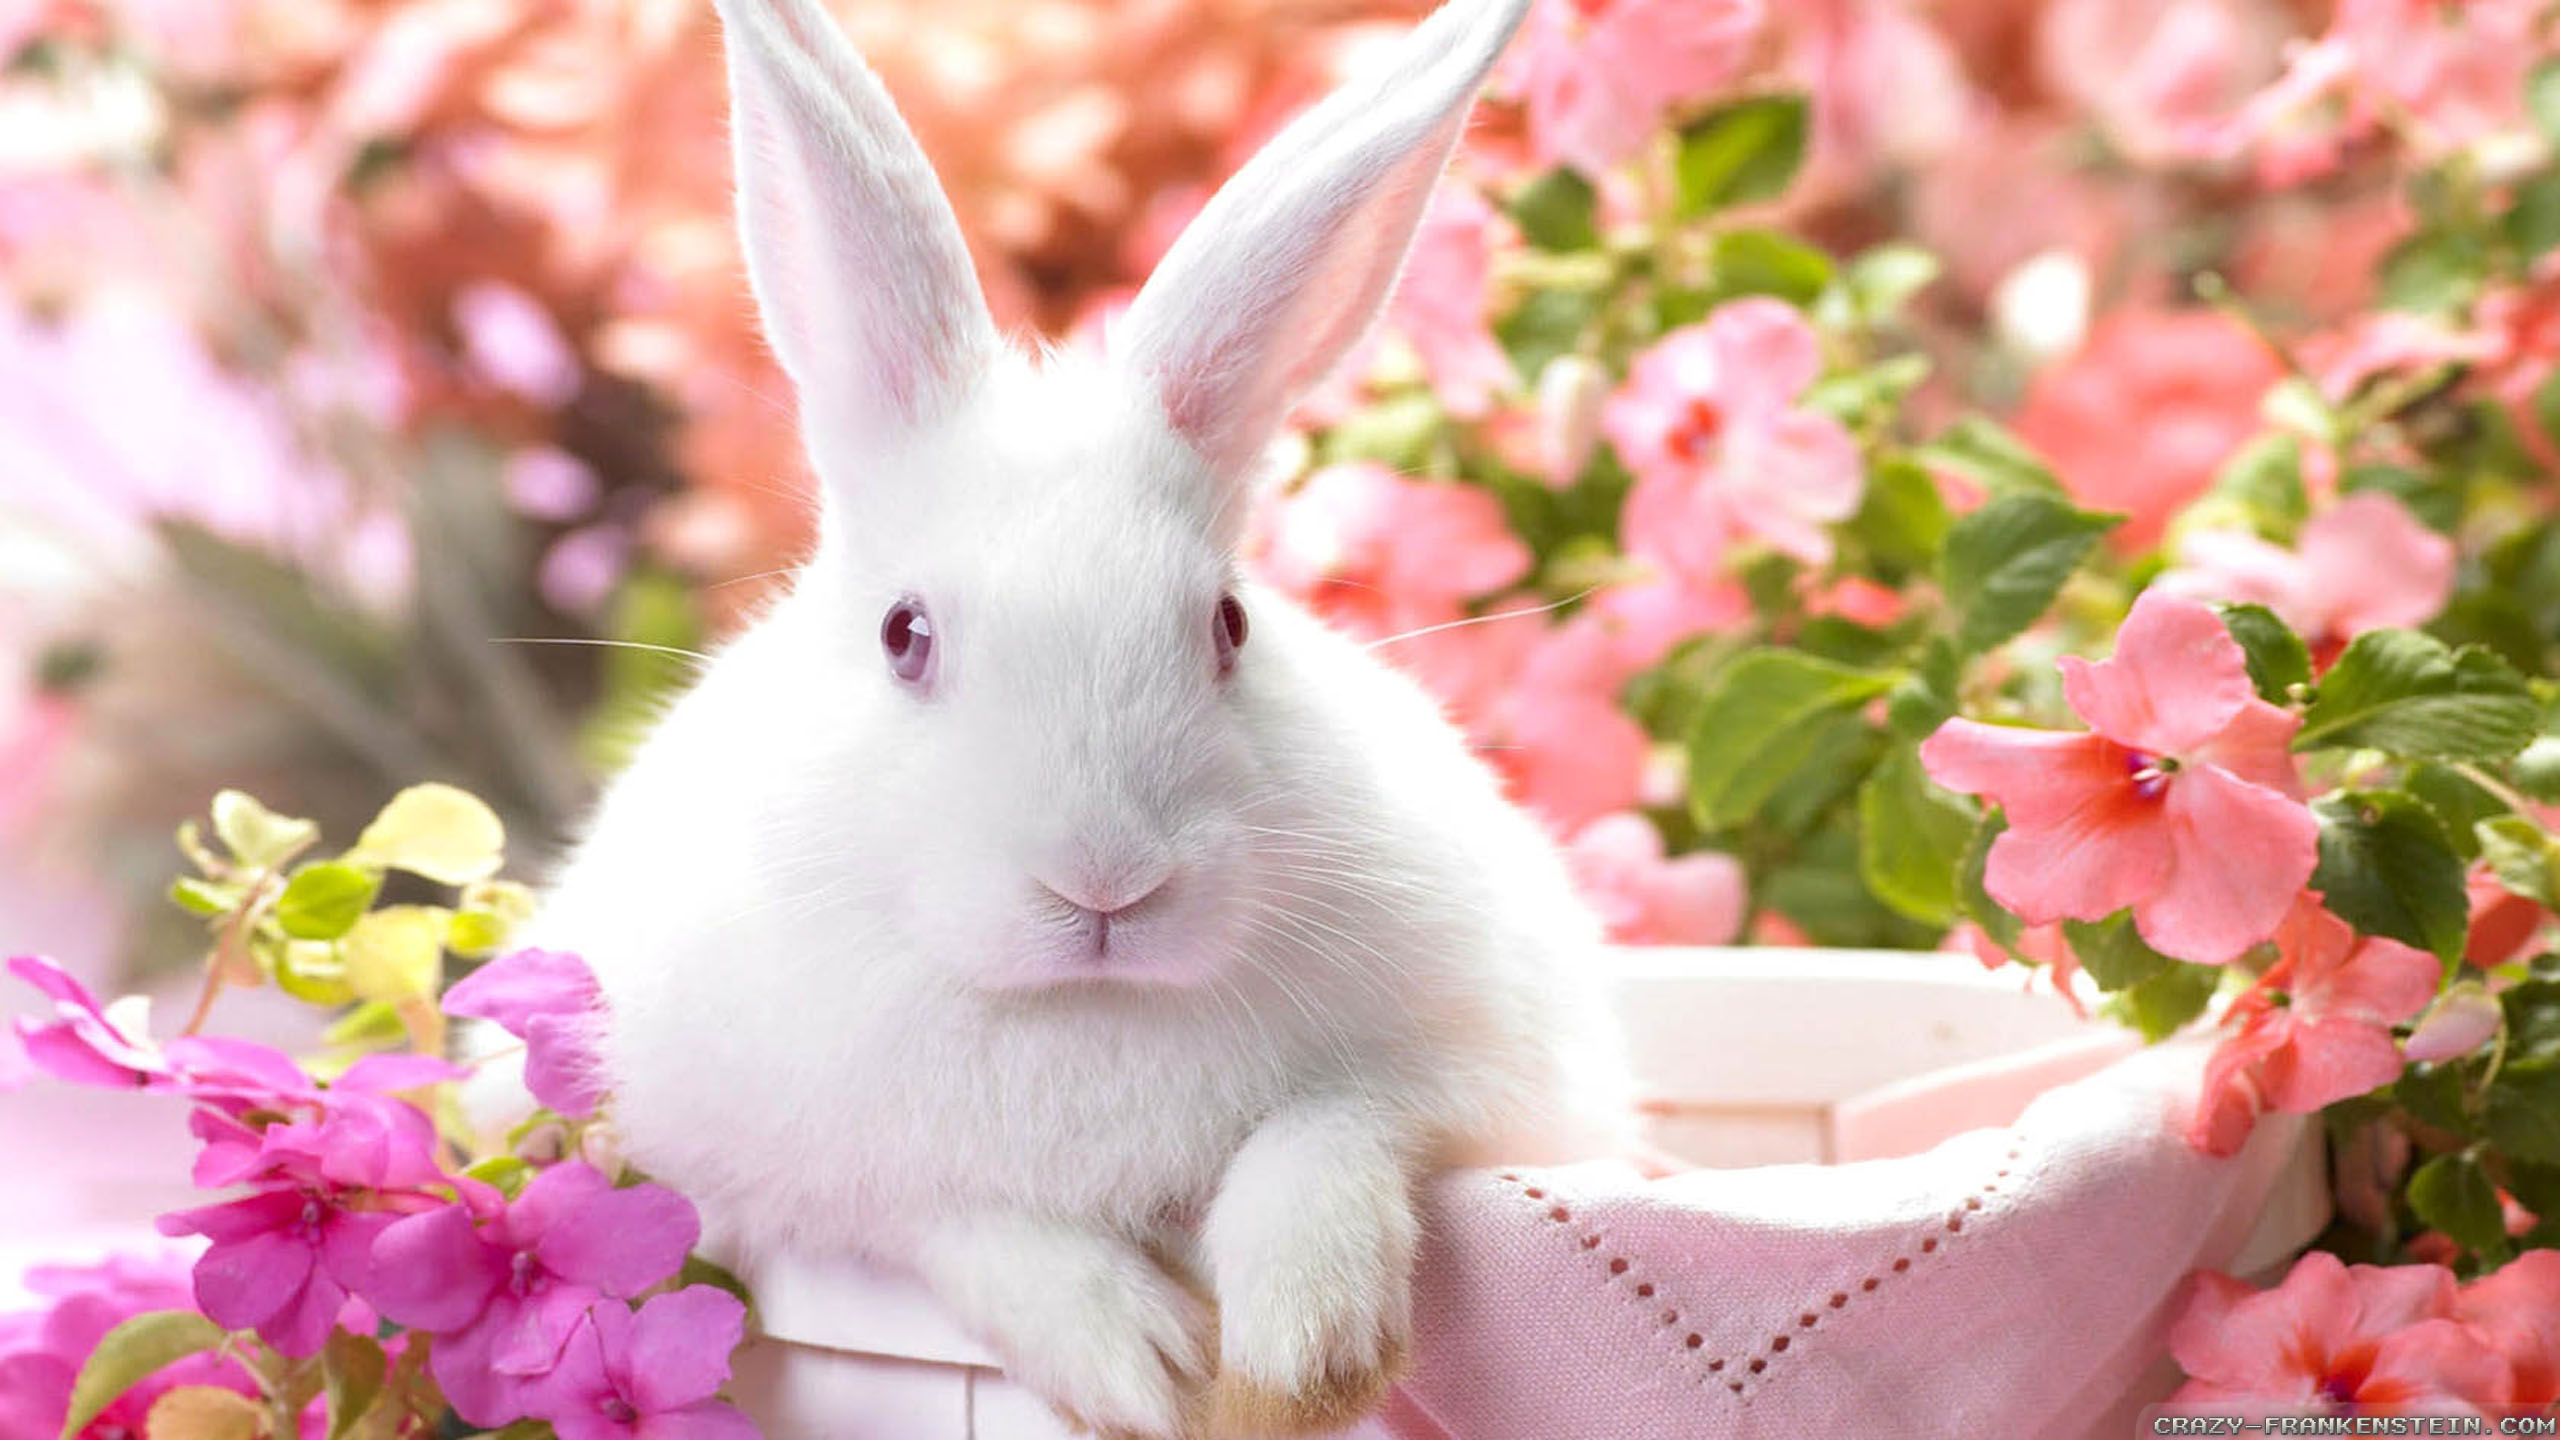 Beautiful Pictures For Easter - HD Wallpaper 